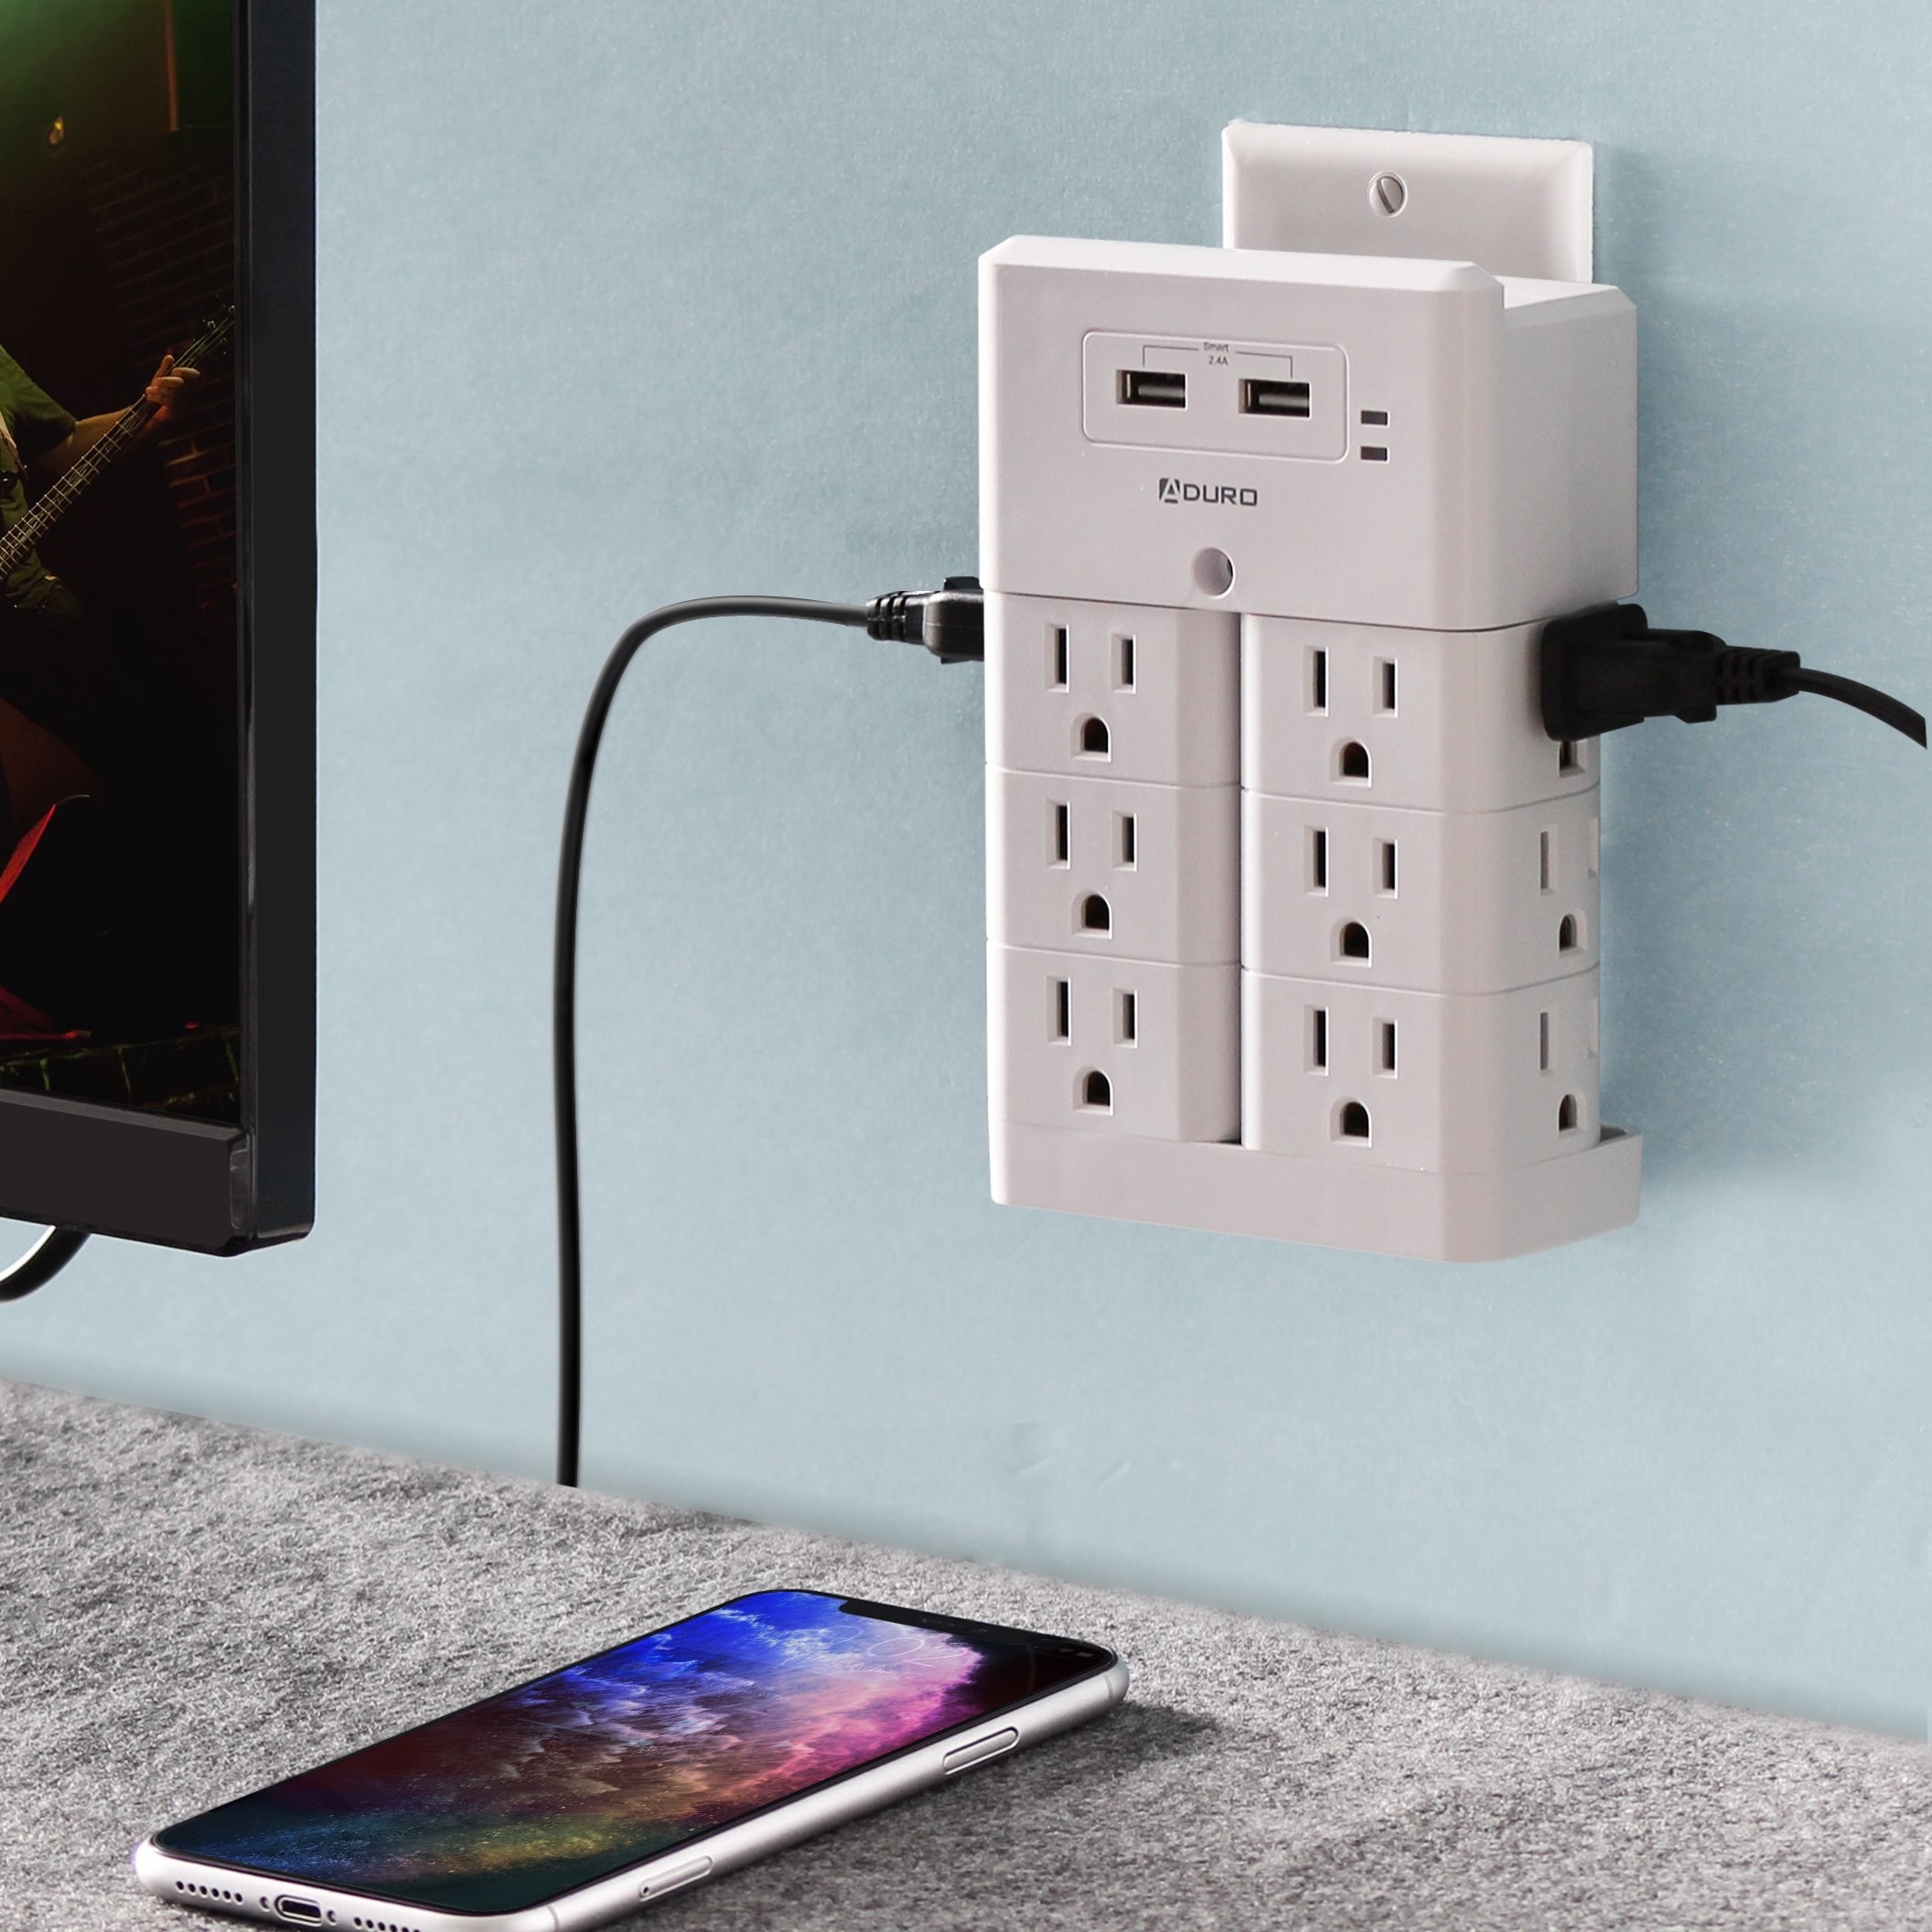 the white aduro surge protector plugged into a wall near a mounted TV